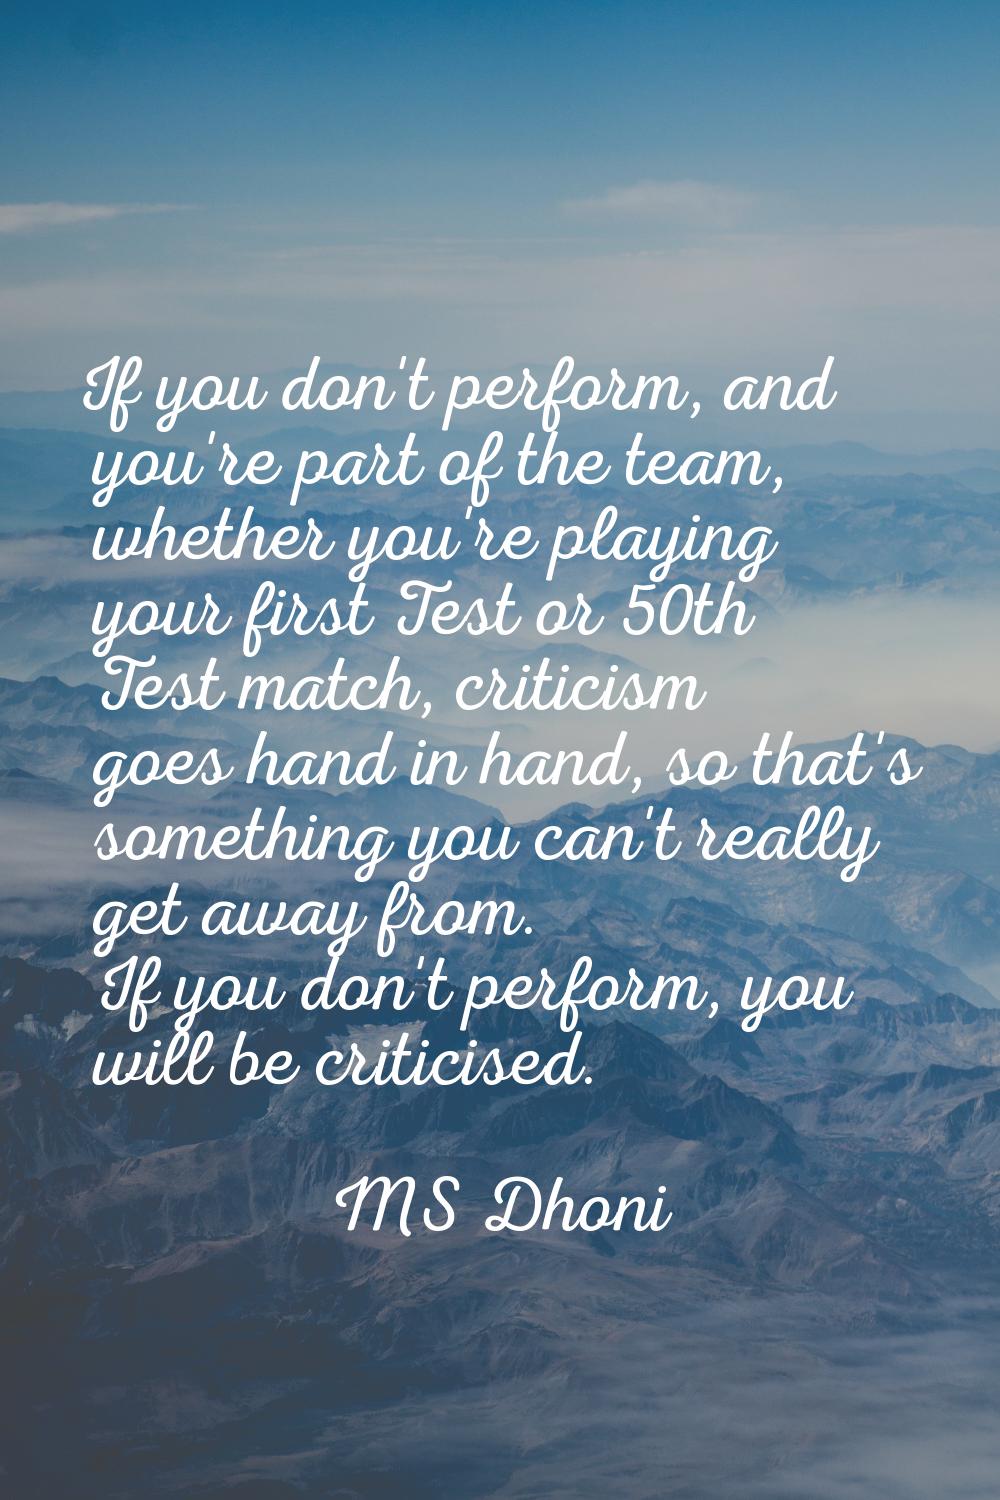 If you don't perform, and you're part of the team, whether you're playing your first Test or 50th T